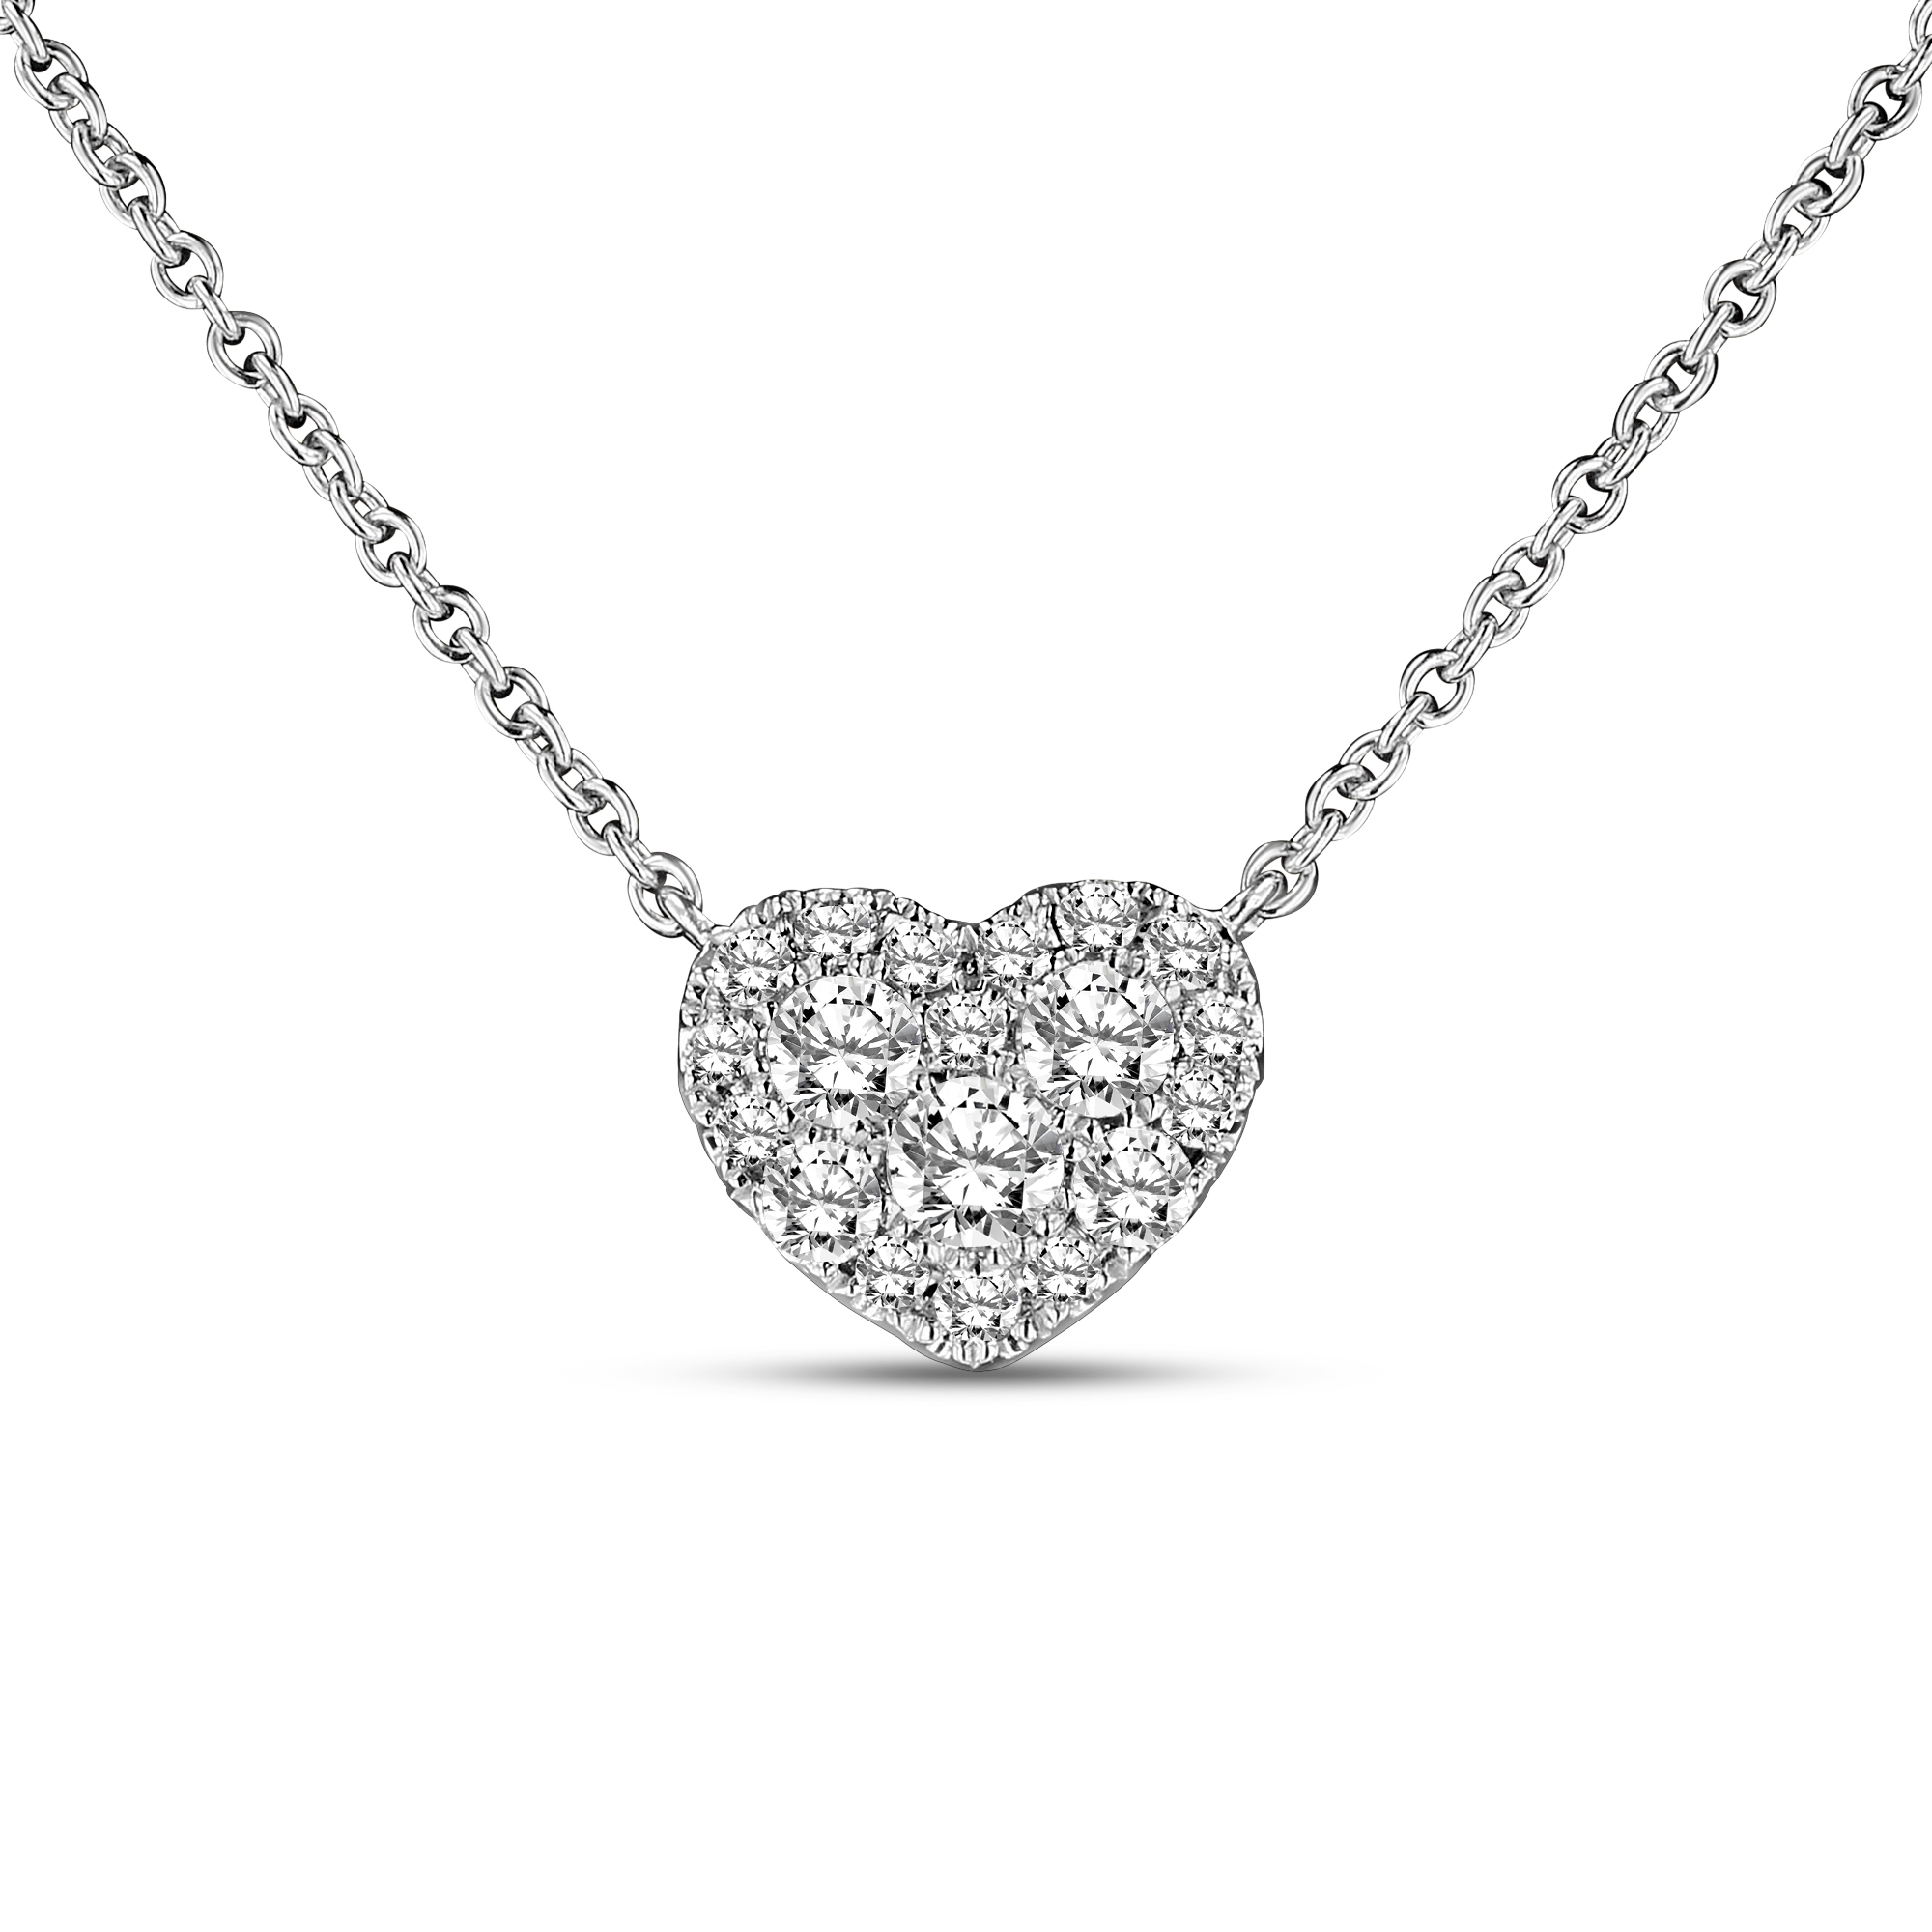 View 0.64ctw Diamond Heart Shaped Pendant in 18k White Gold